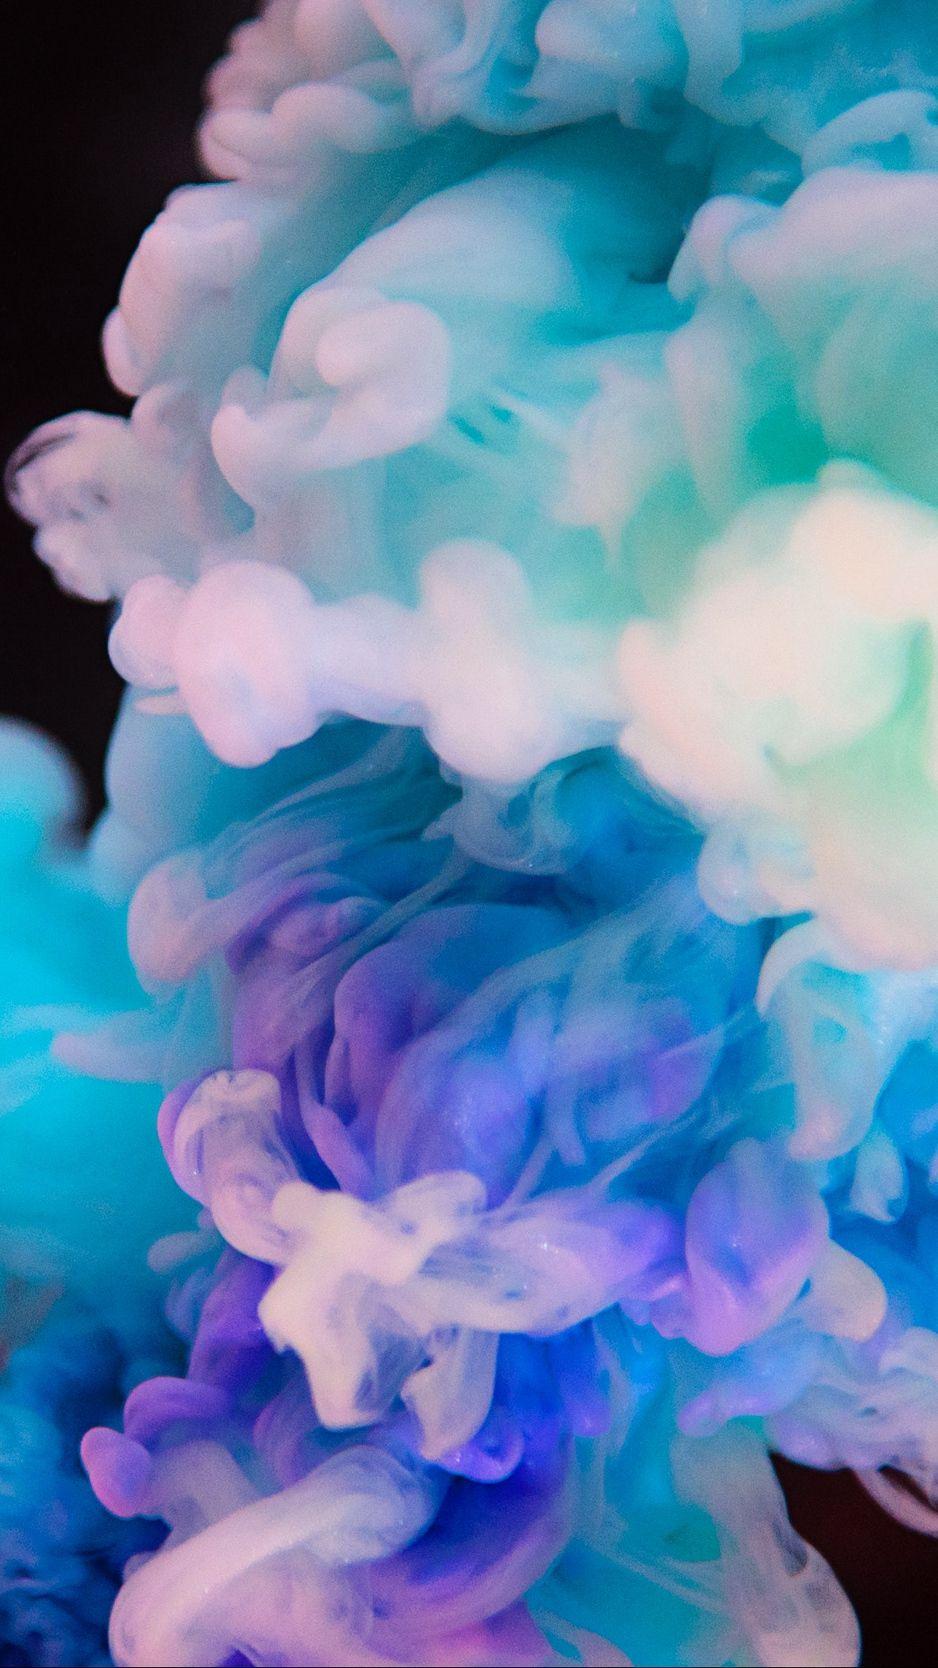 Color Smoke Iphone 6 Wallpapers Top Free Color Smoke Iphone 6 Backgrounds Wallpaperaccess